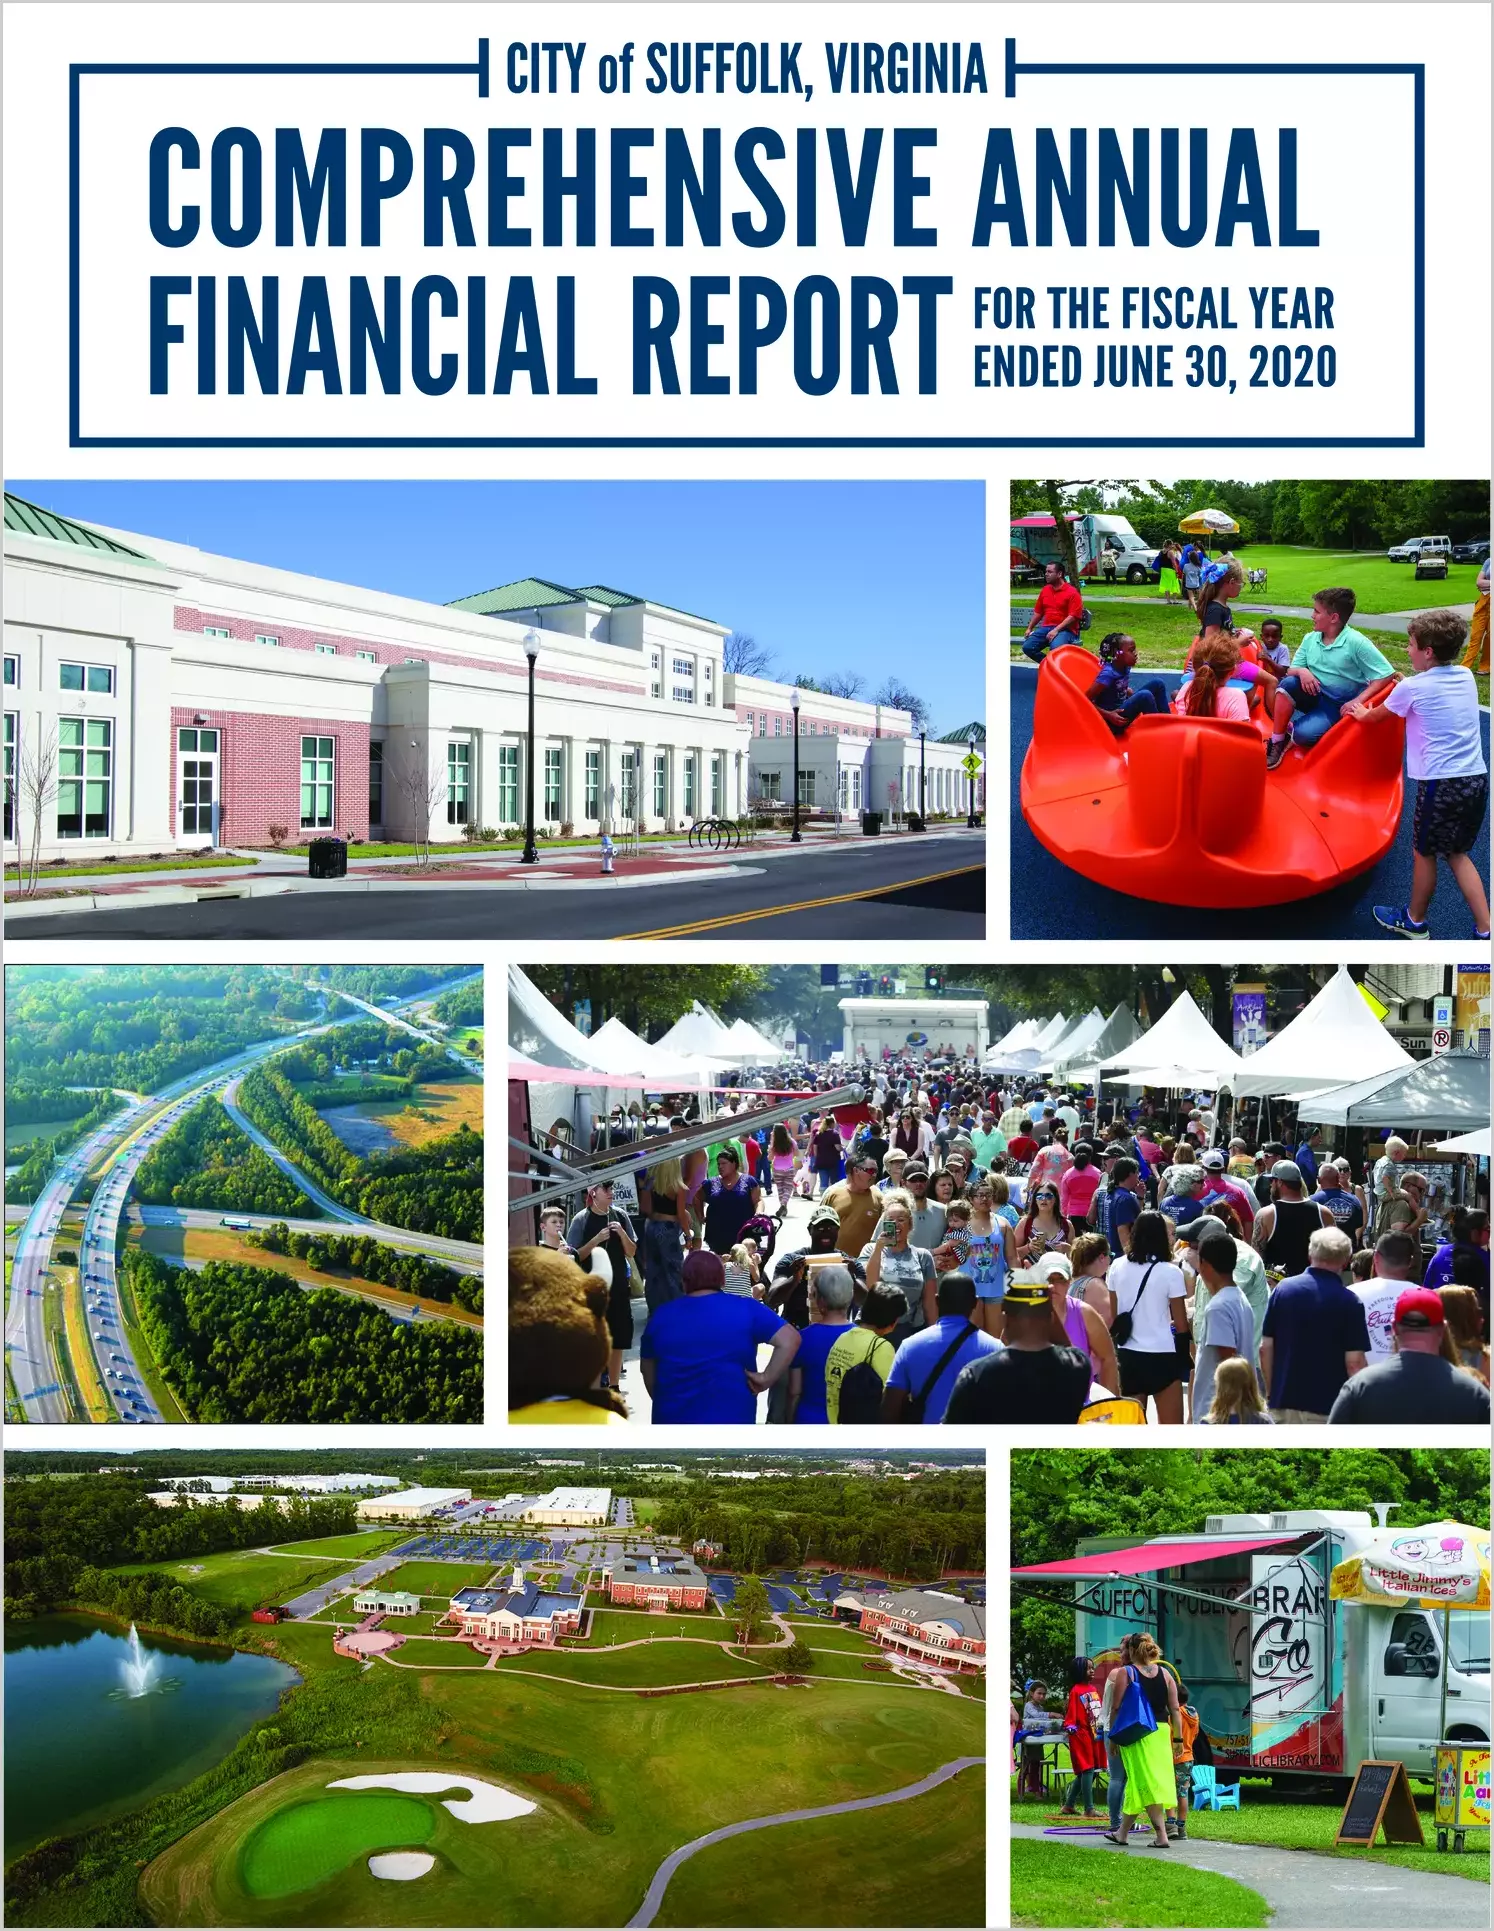 2020 Annual Financial Report for City of Suffolk